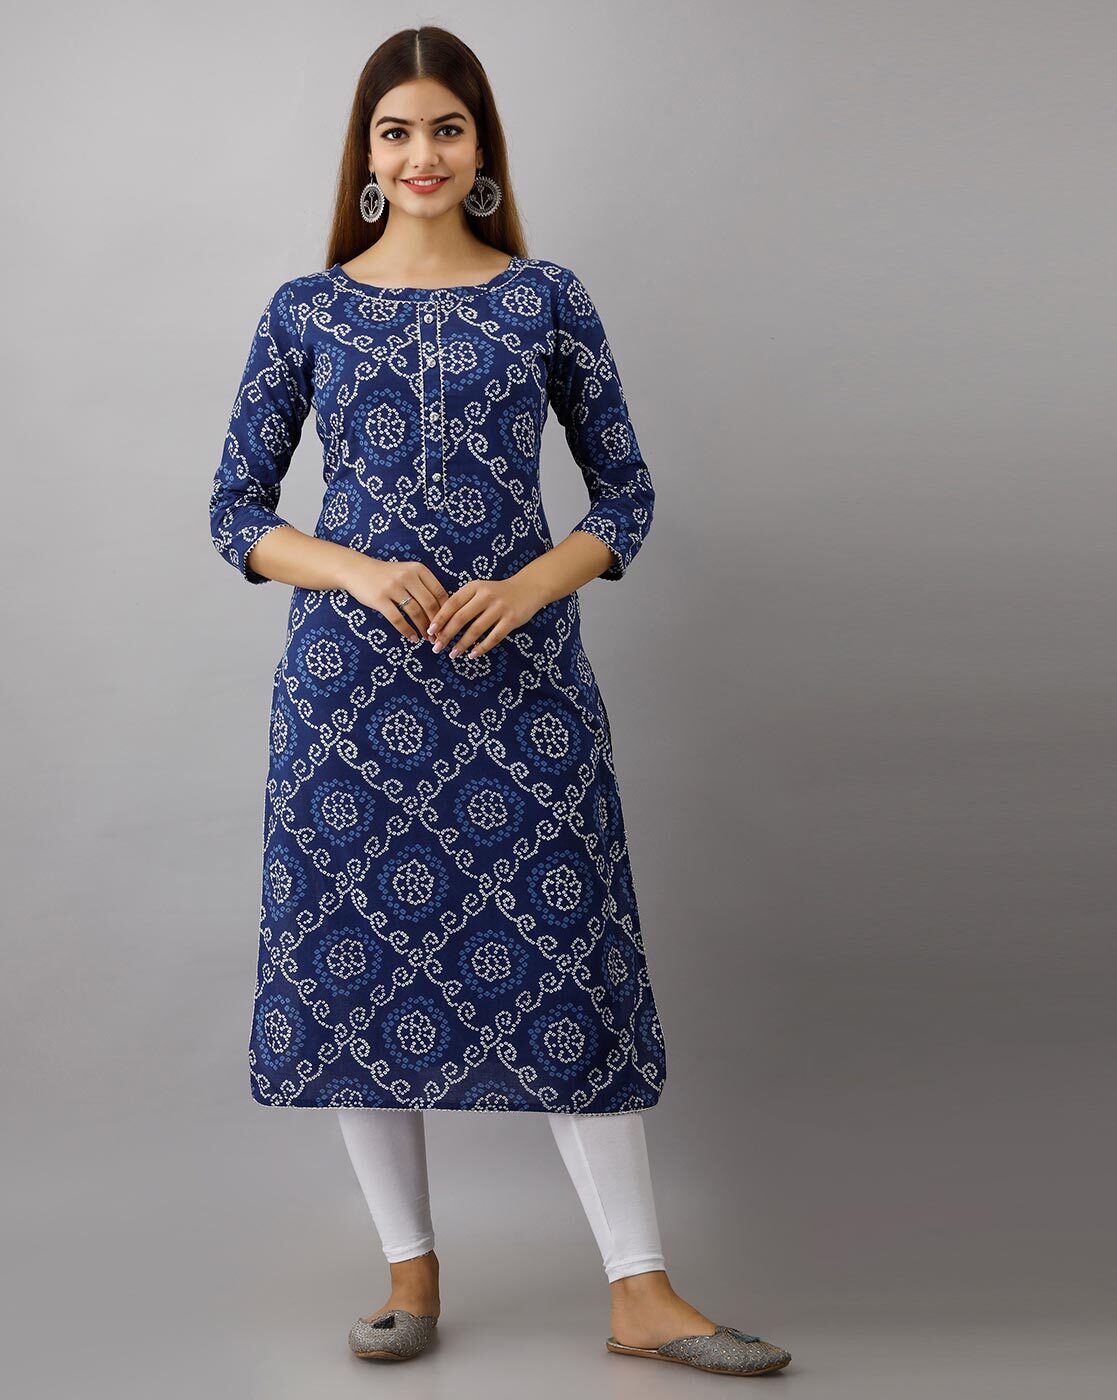 Details more than 80 blue and white combination kurti best  thtantai2